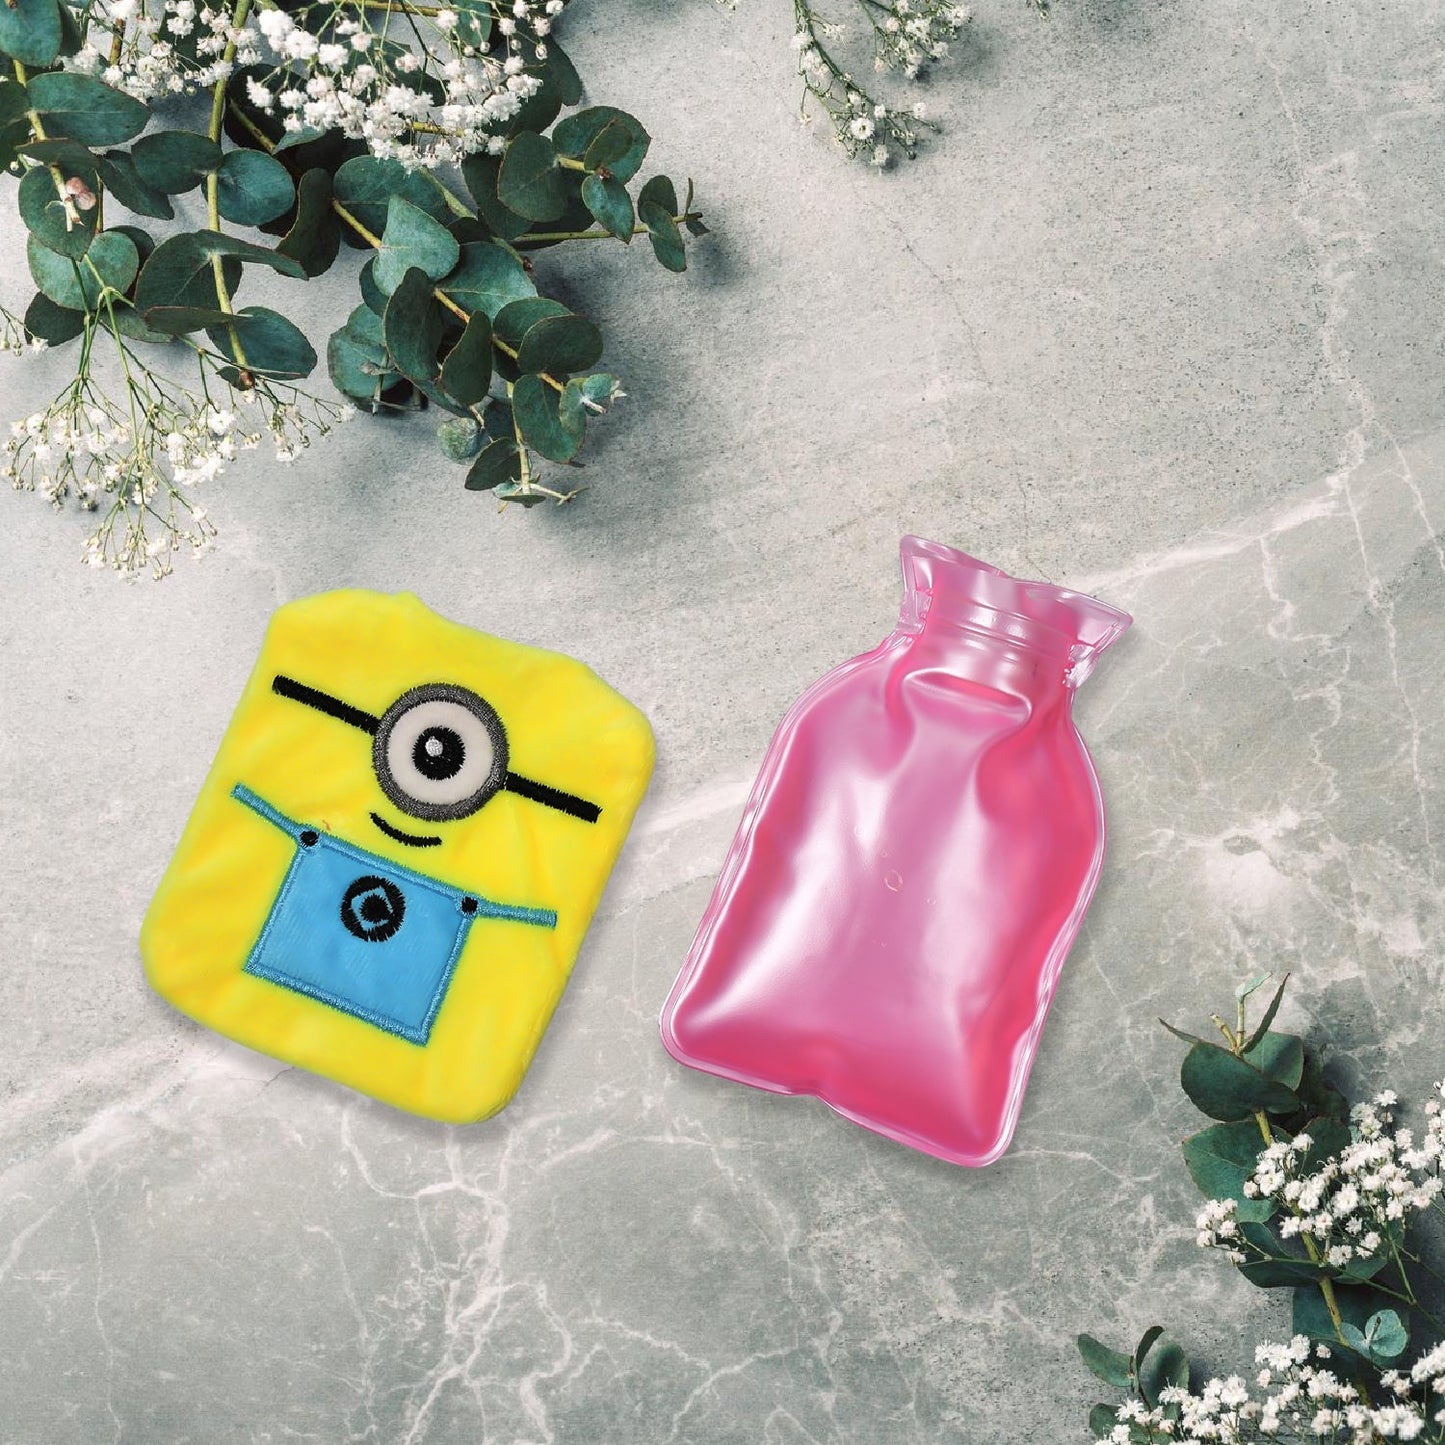 Minions small Hot Water Bag with Cover for Pain Relief, Neck, Shoulder Pain and Hand, Feet Warmer, Menstrual Cramps